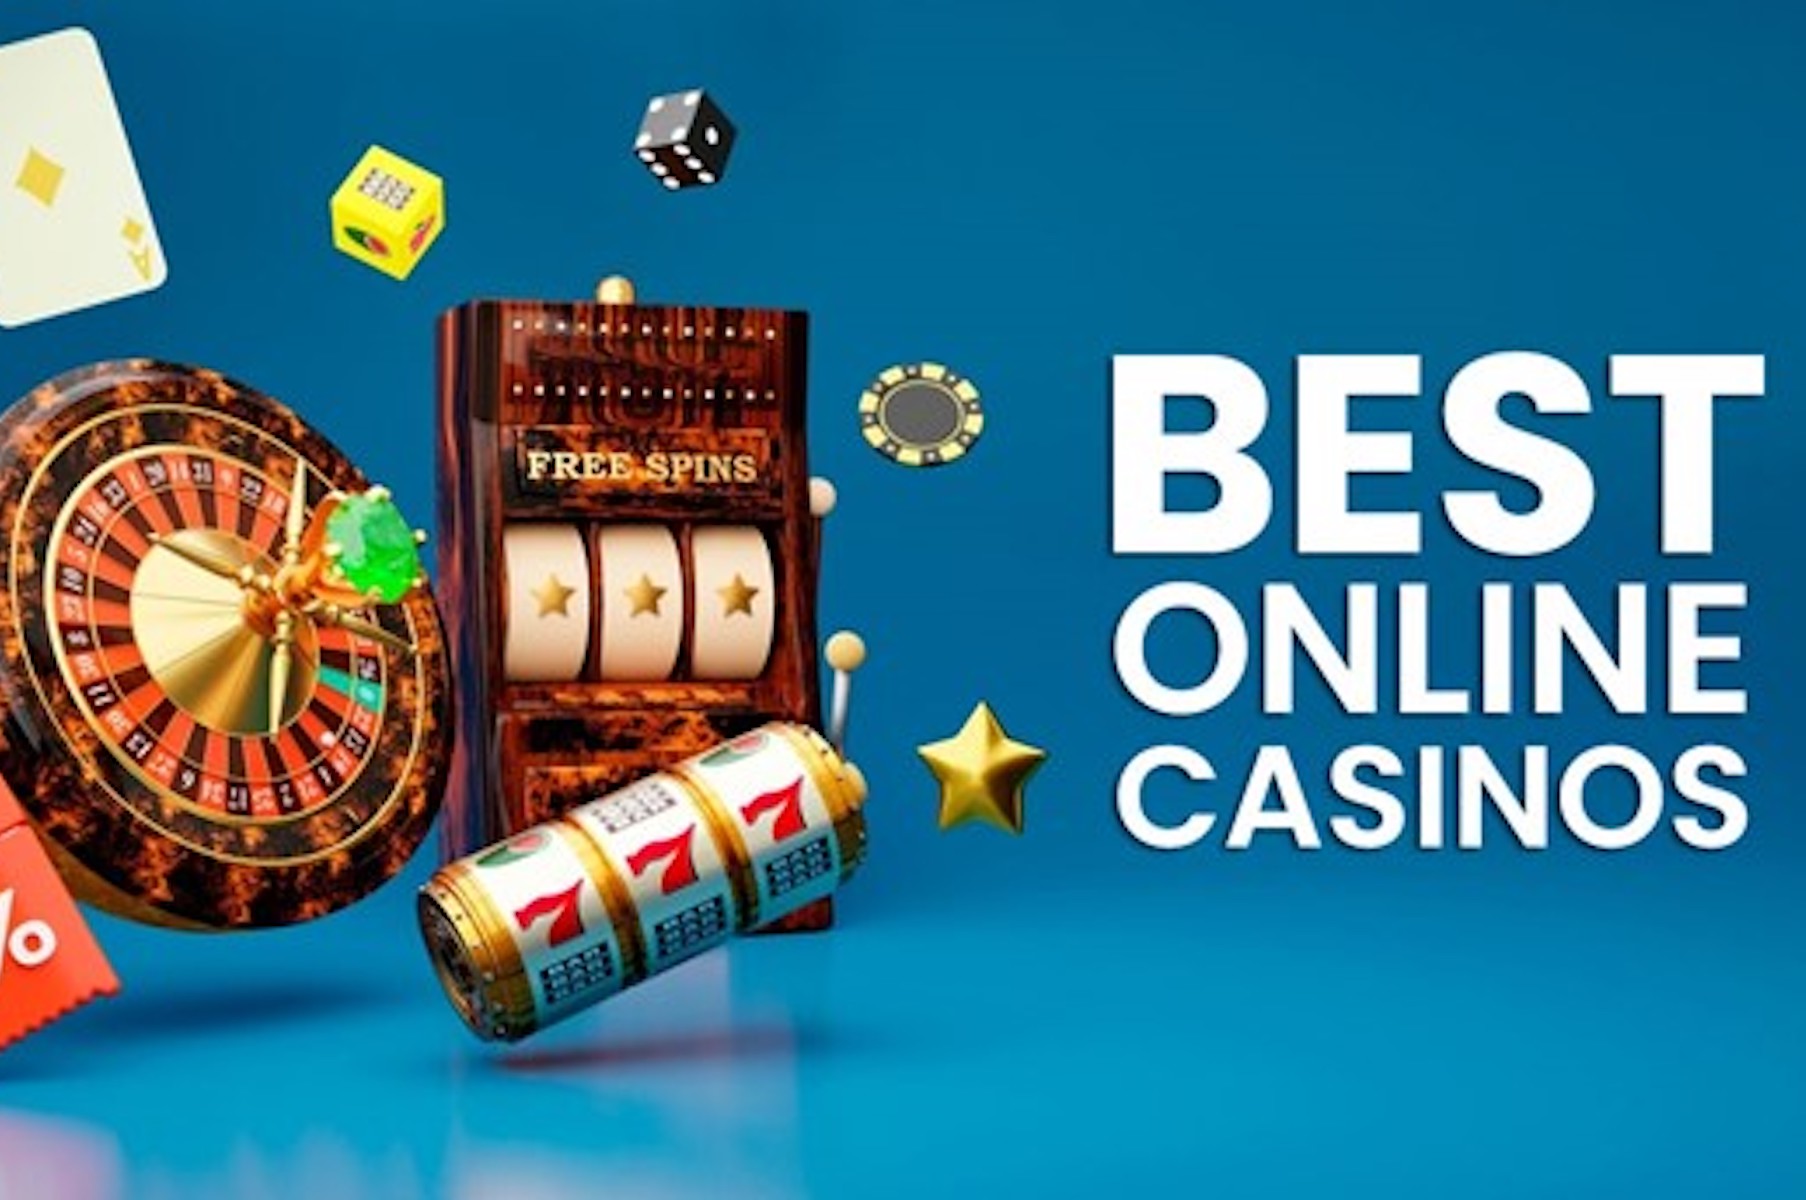 9 Easy Ways To best online casino Ireland Without Even Thinking About It